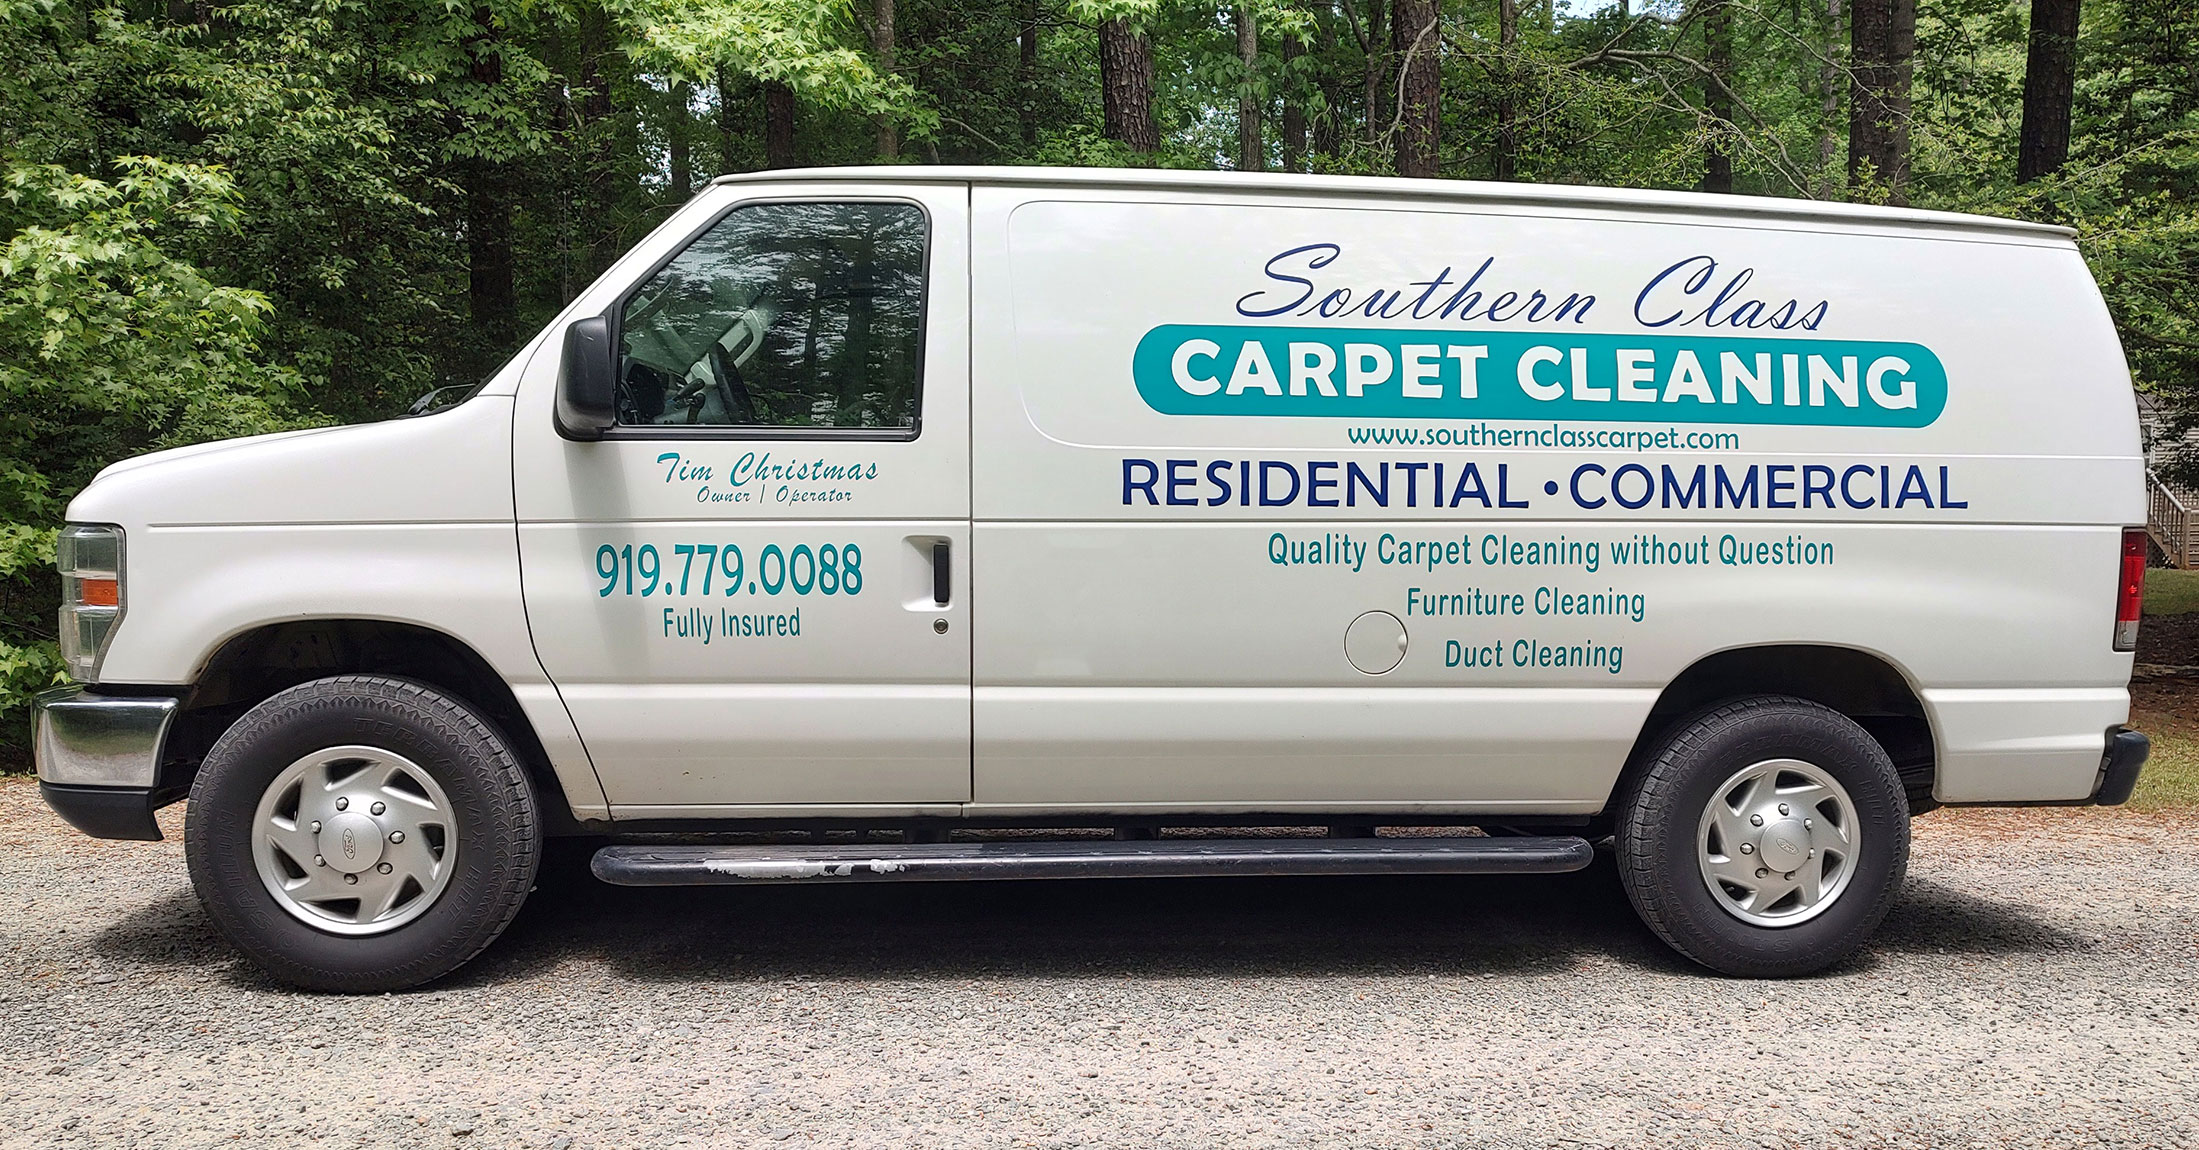 Professional Carpet, Duct, Upholstery and Tile & Grout Cleaning in Raleigh North Carolina